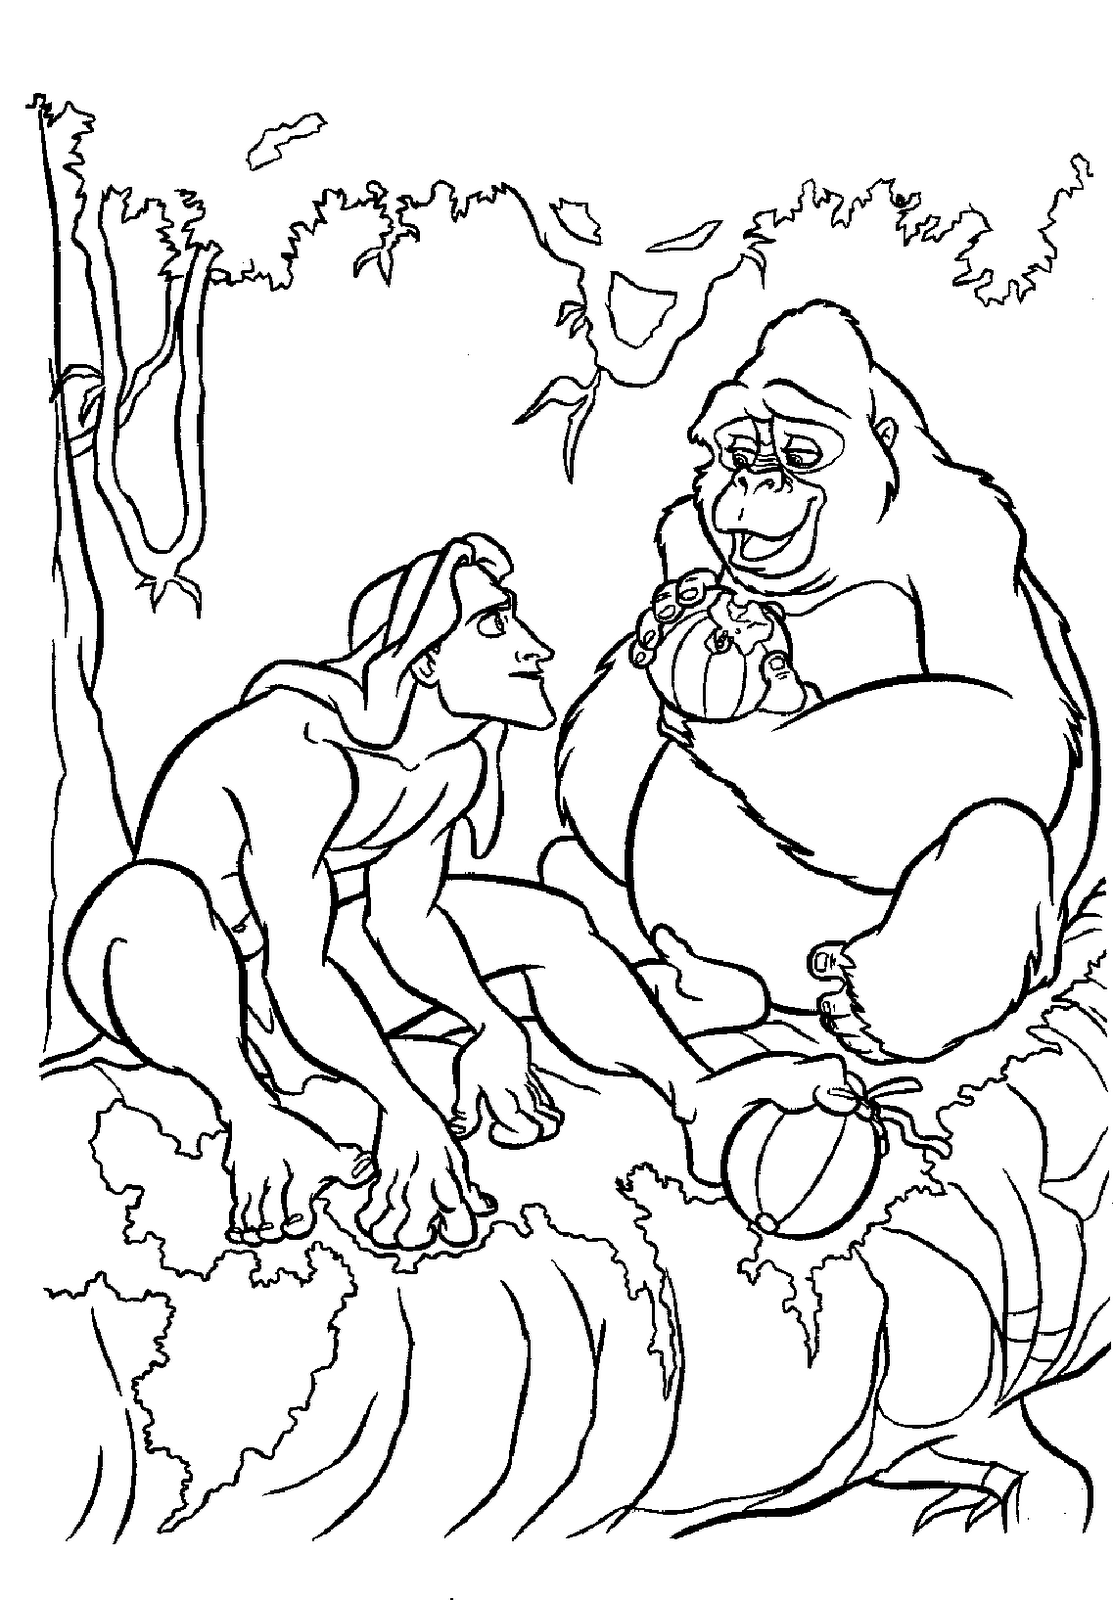 Tarzan coloring pages to download and print for free